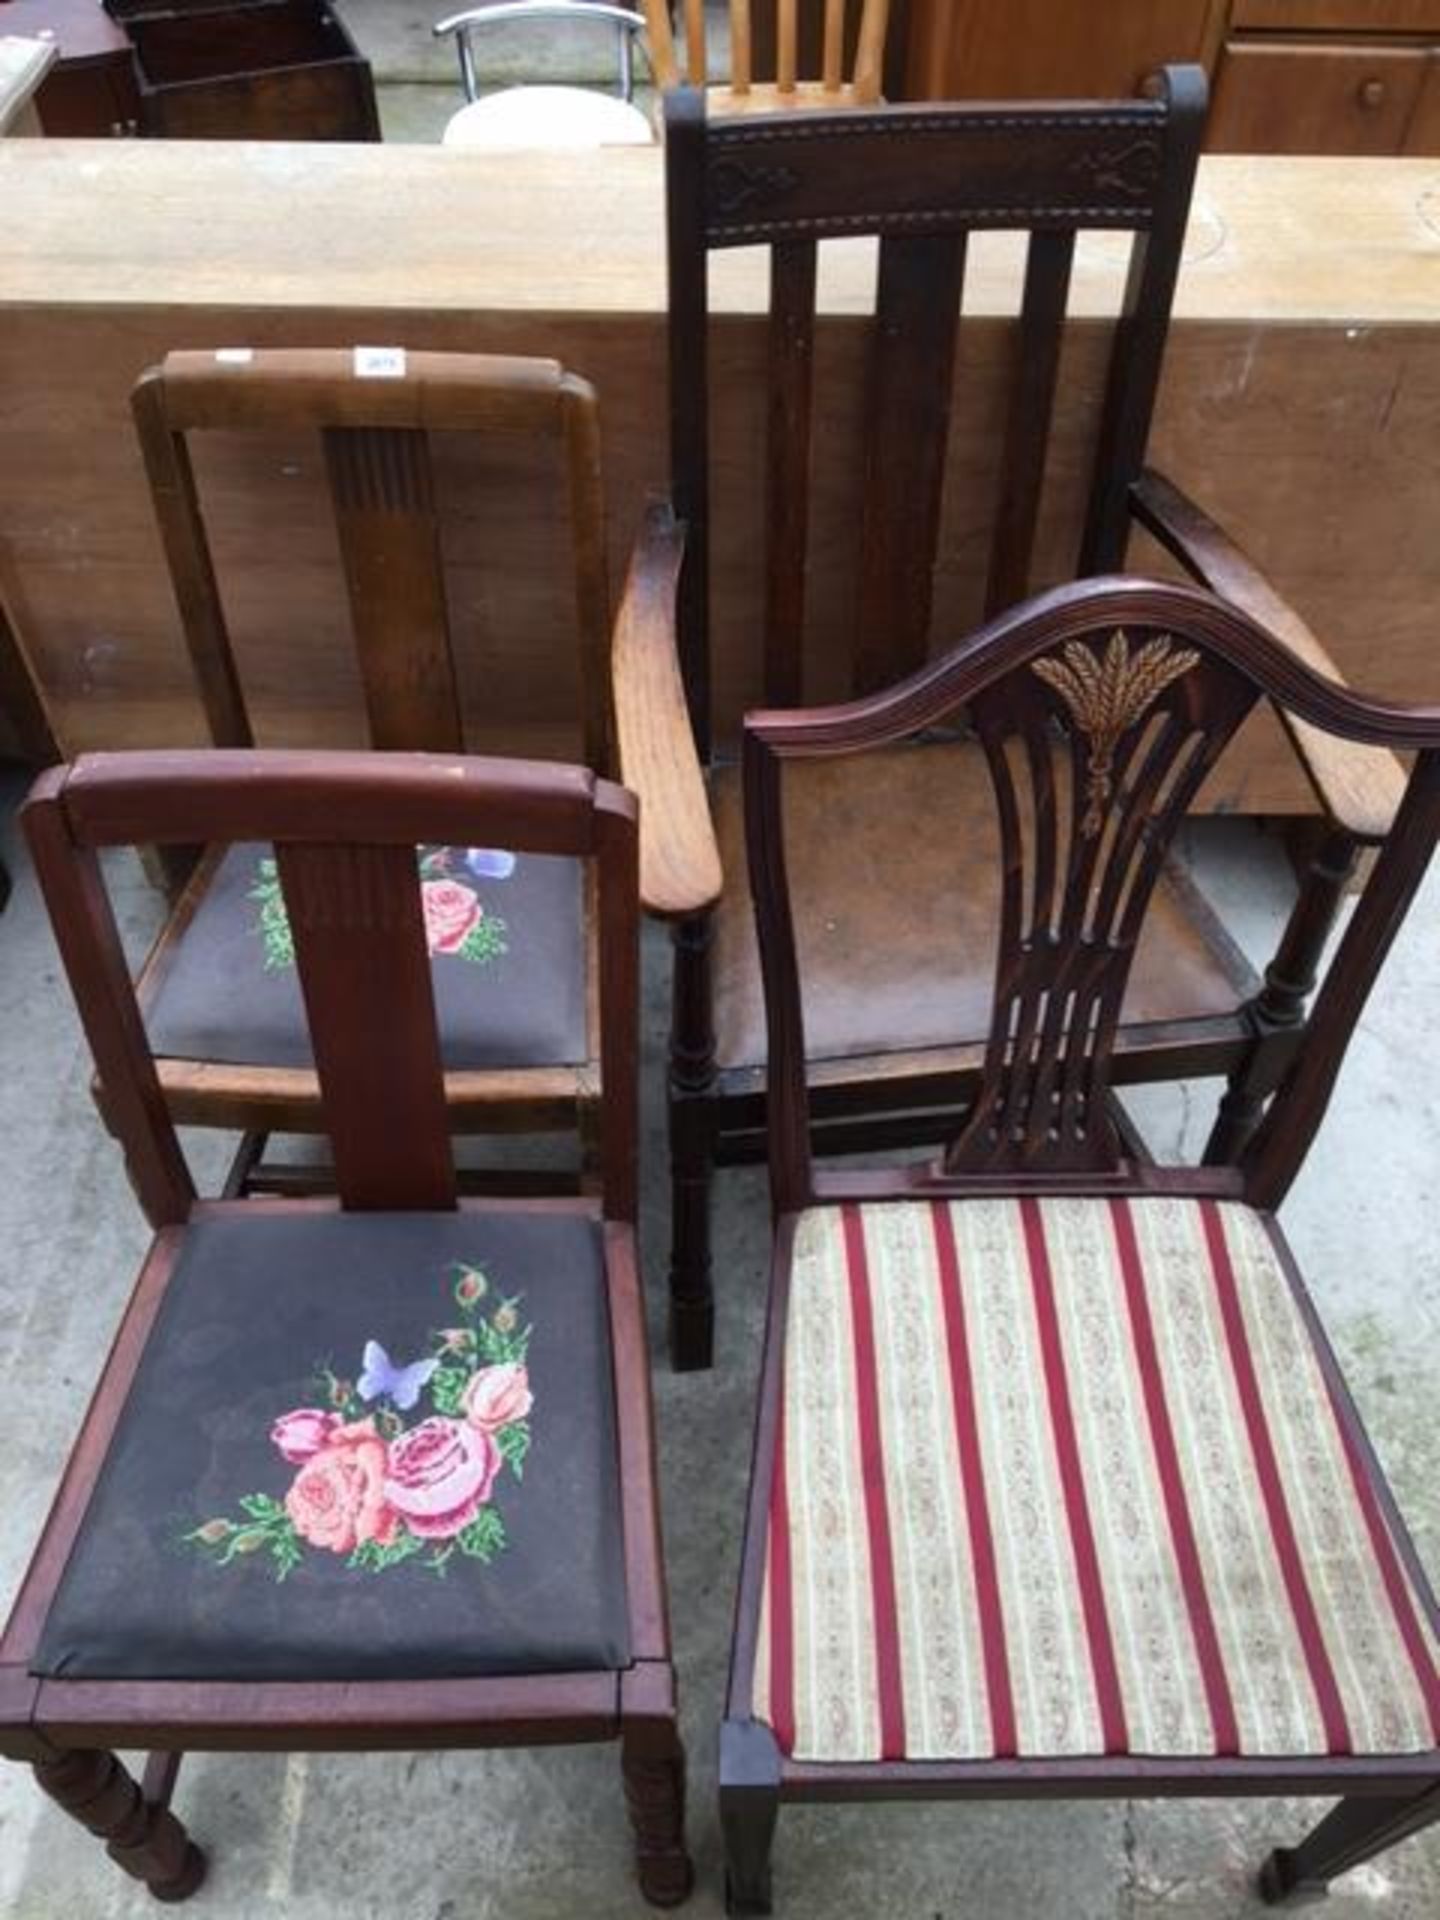 THREE VARIOUS DINING CHAIRS AND AN EARLY 20TH CENTURY OAK CARVER CHAIR - Image 4 of 4